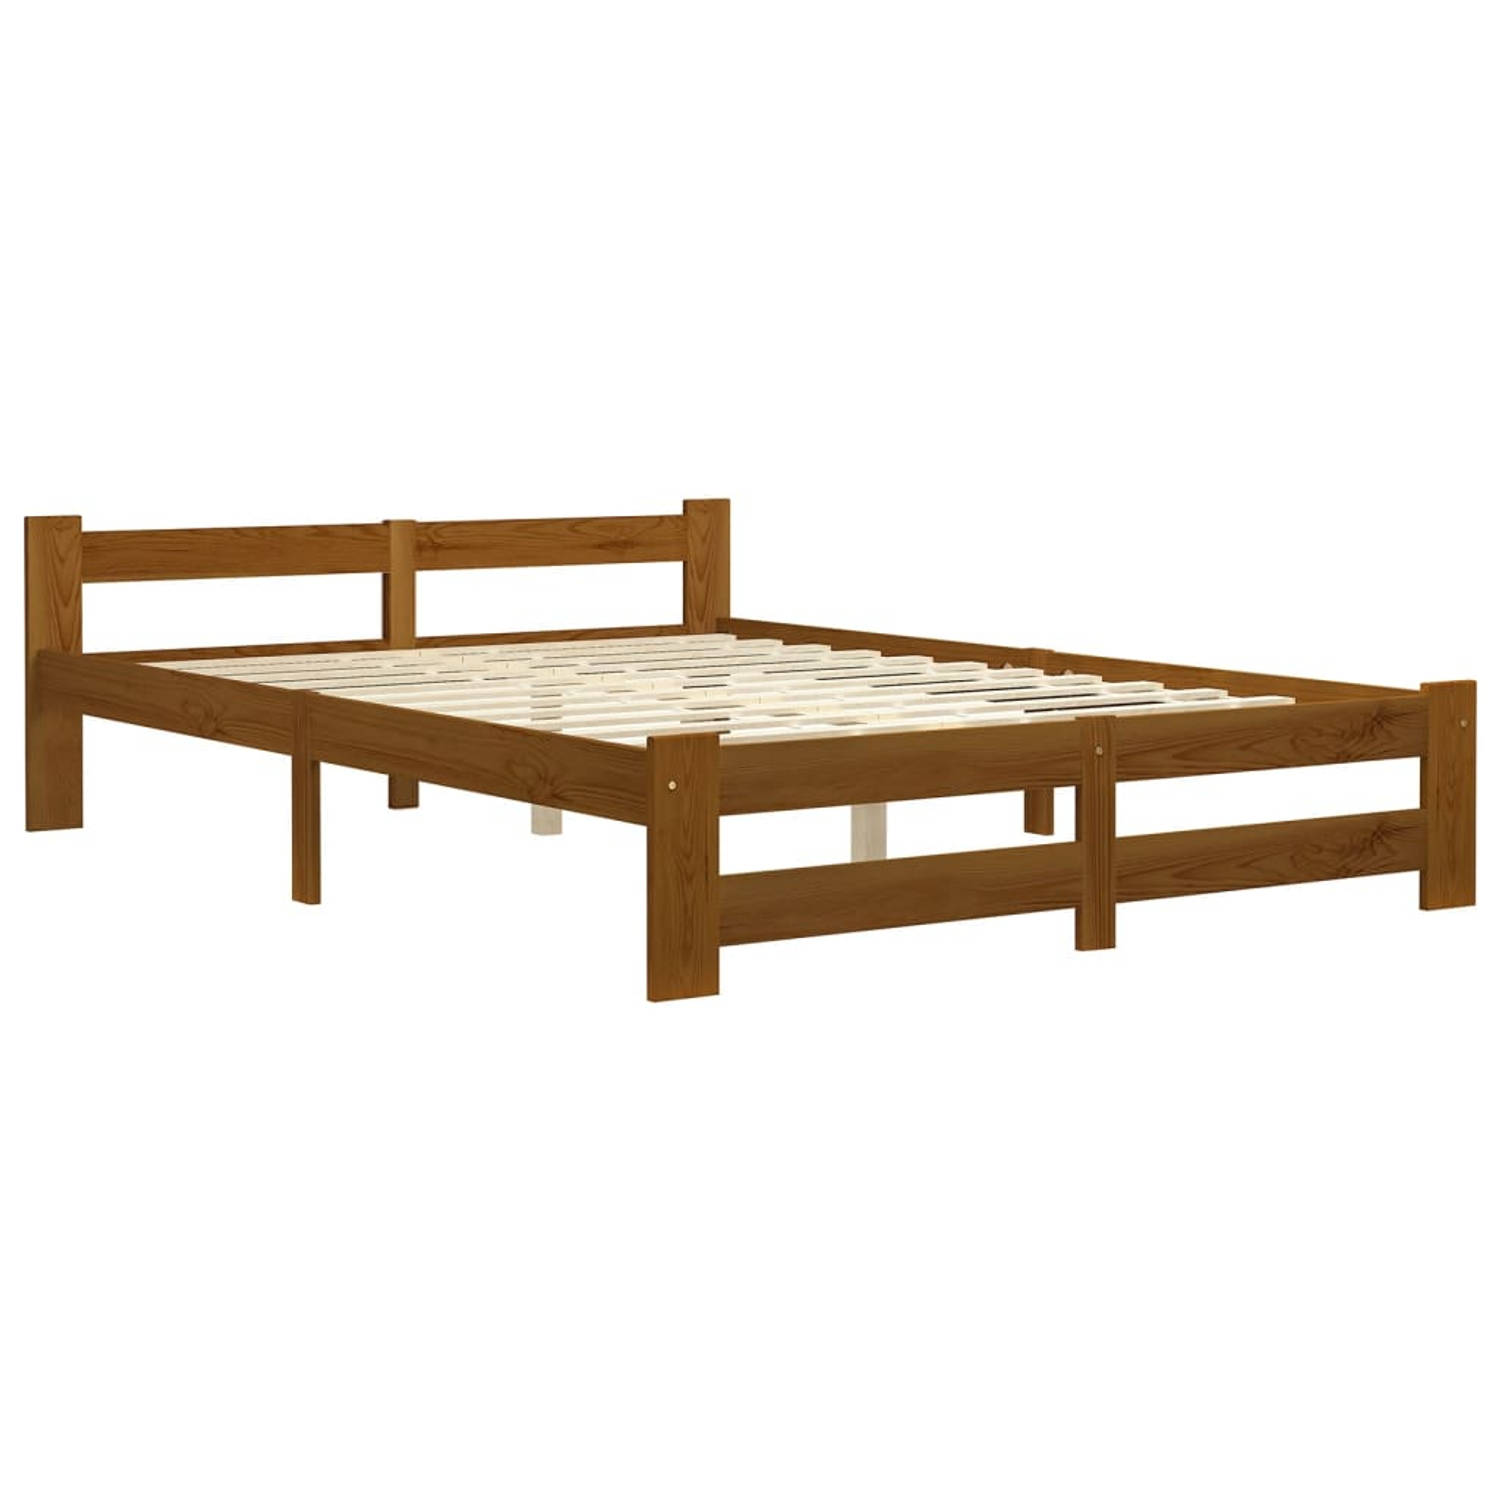 The Living Store Bedframe massief grenenhout honingbruin 120x200 cm - Bedframe - Bedframes - Bed Frame - Bed Frames - Bed - Bedden - Houten Bedframe - Houten Bedframes - 2-persoons